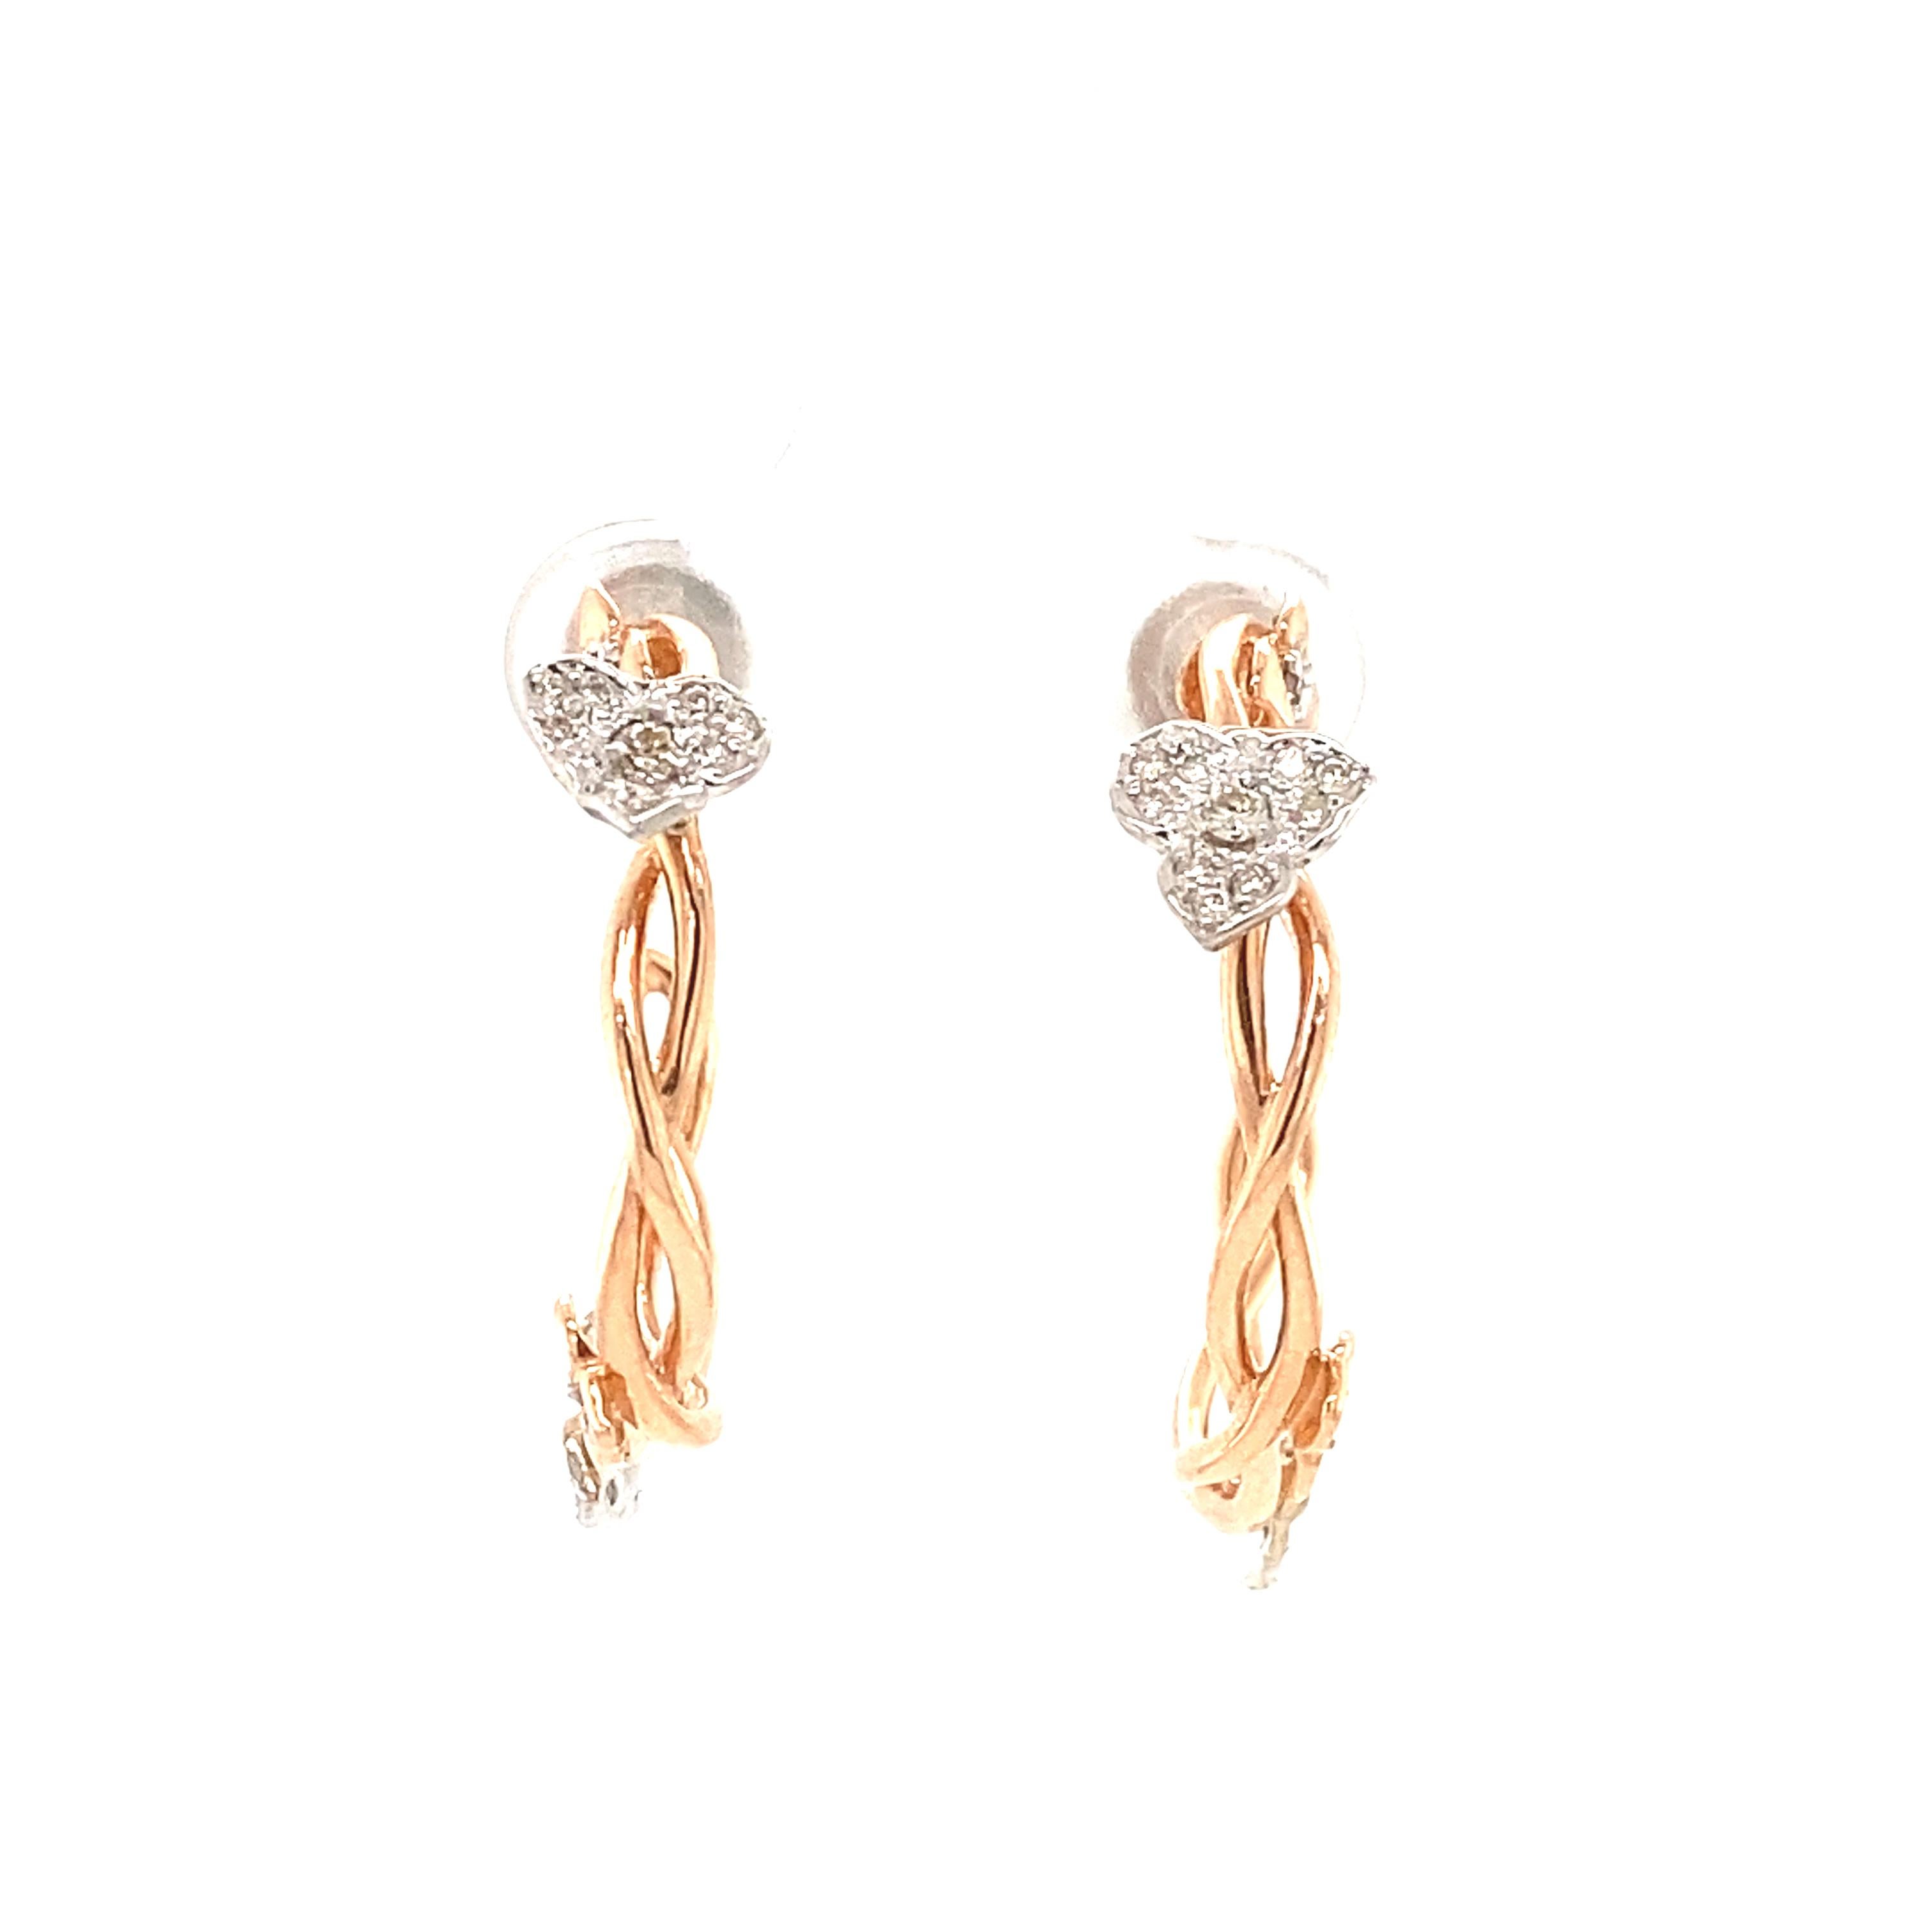 A pair of rose gold hoop earrings, each featuring a twisted design that adds a dynamic and elegant look. At the front of each hoop is a floral-shaped motif encrusted with multiple small, diamonds that catch the light. This jewelry is a sophisticated